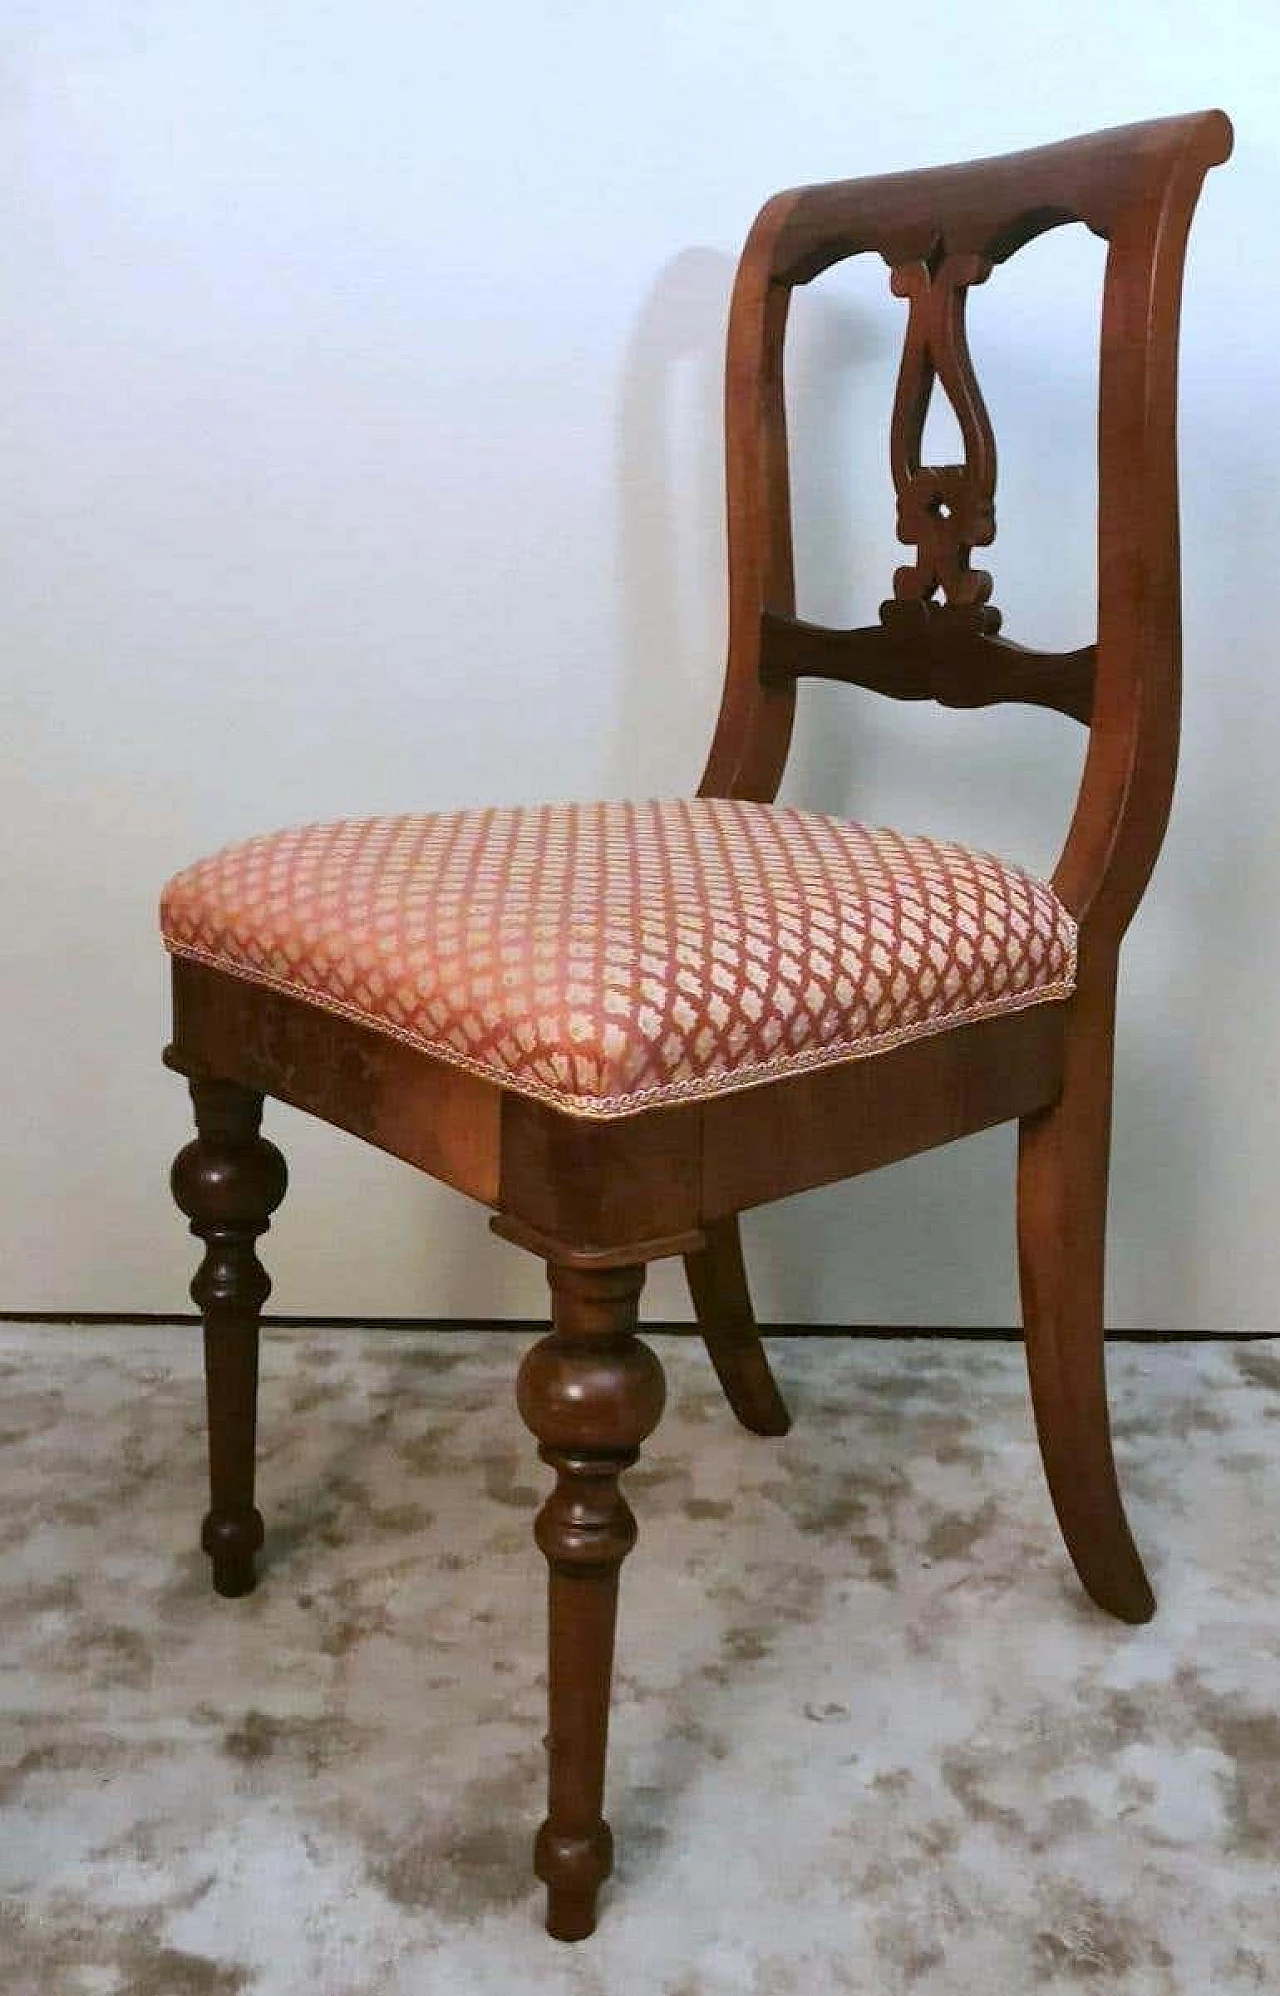 4 Biedermeier style wooden and fabric chairs, mid-19th century 12